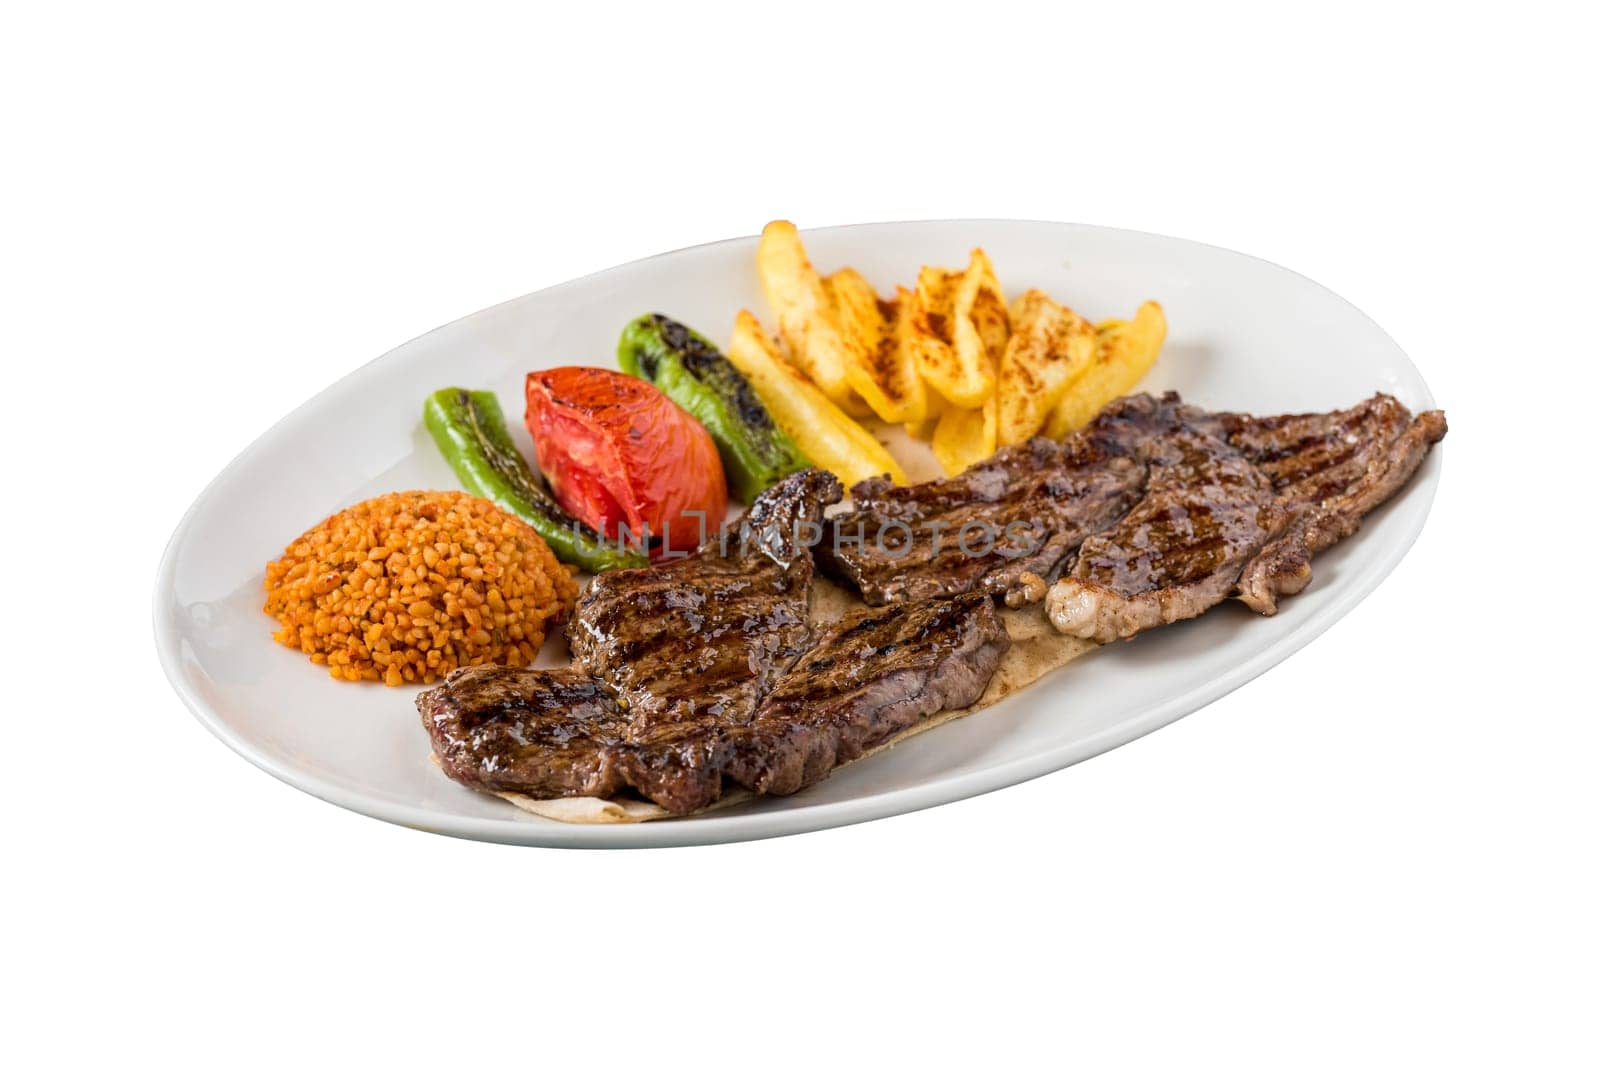 Grilled steak on white background. with bulgur pilaf, french fries, tomatoes garnish